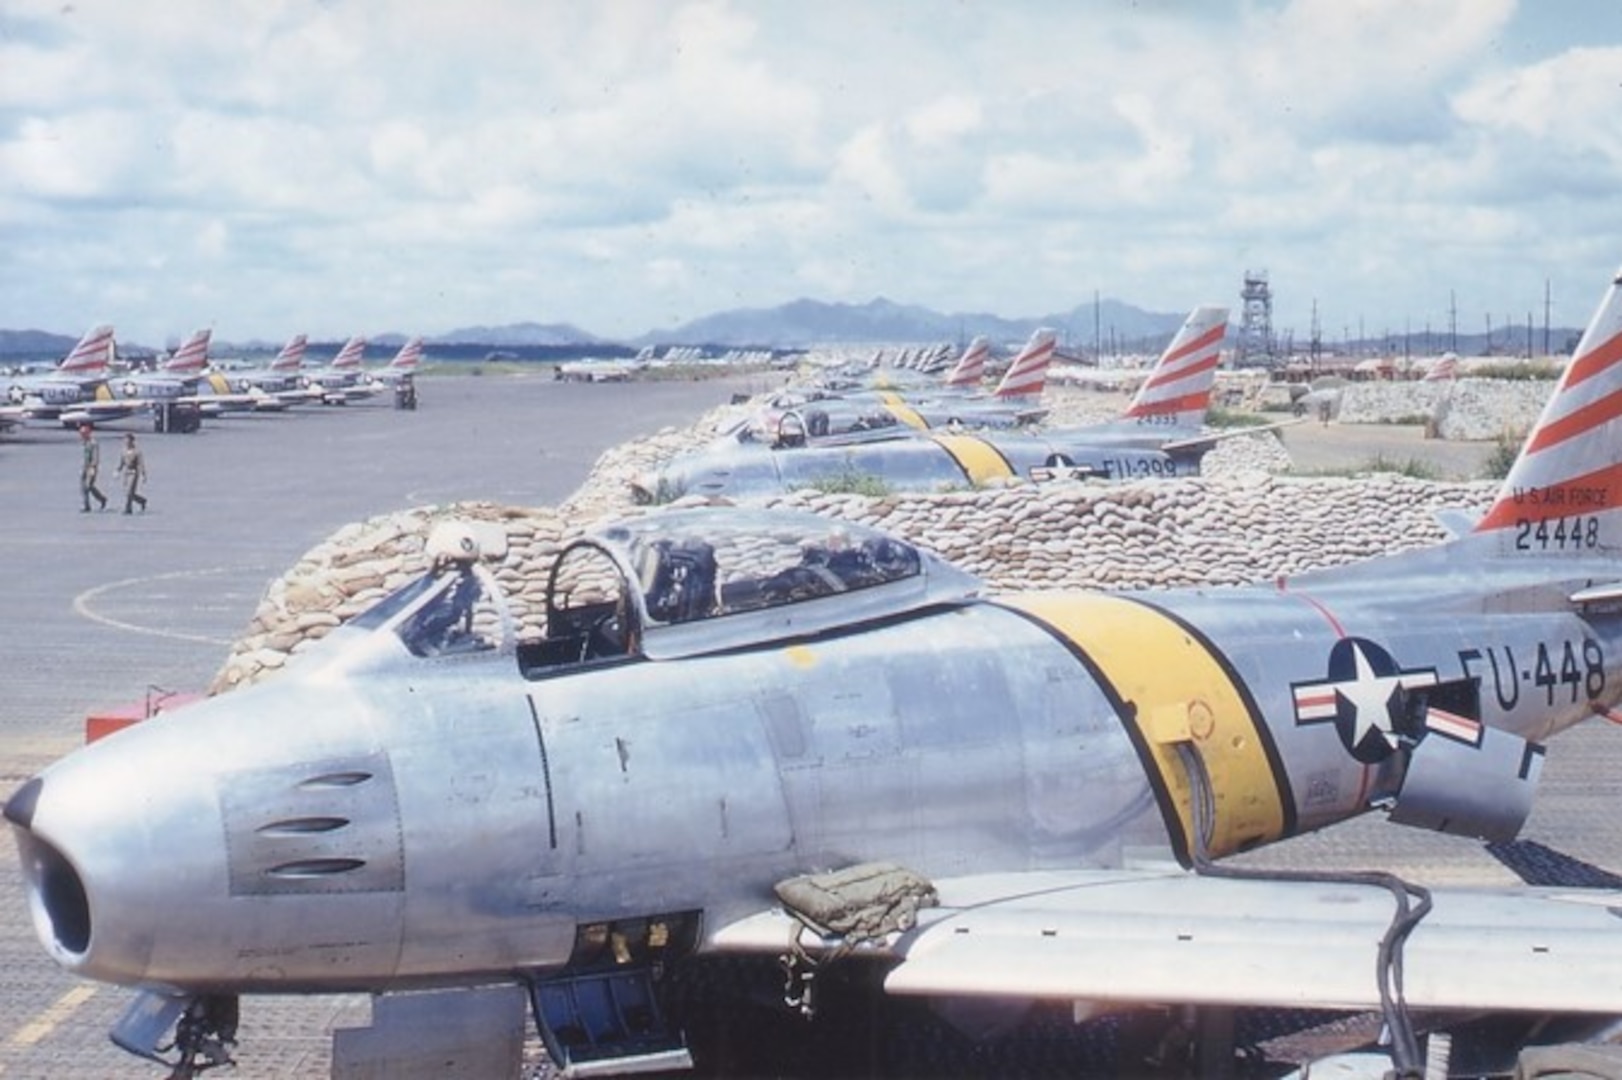 U.S. Air Force F-86 Sabres assigned to the 51st Fighter-Interceptor Wing, are lined up in revetments at Suwon Air Base, Republic of Korea, circa June 1953. (Courtesy photo)